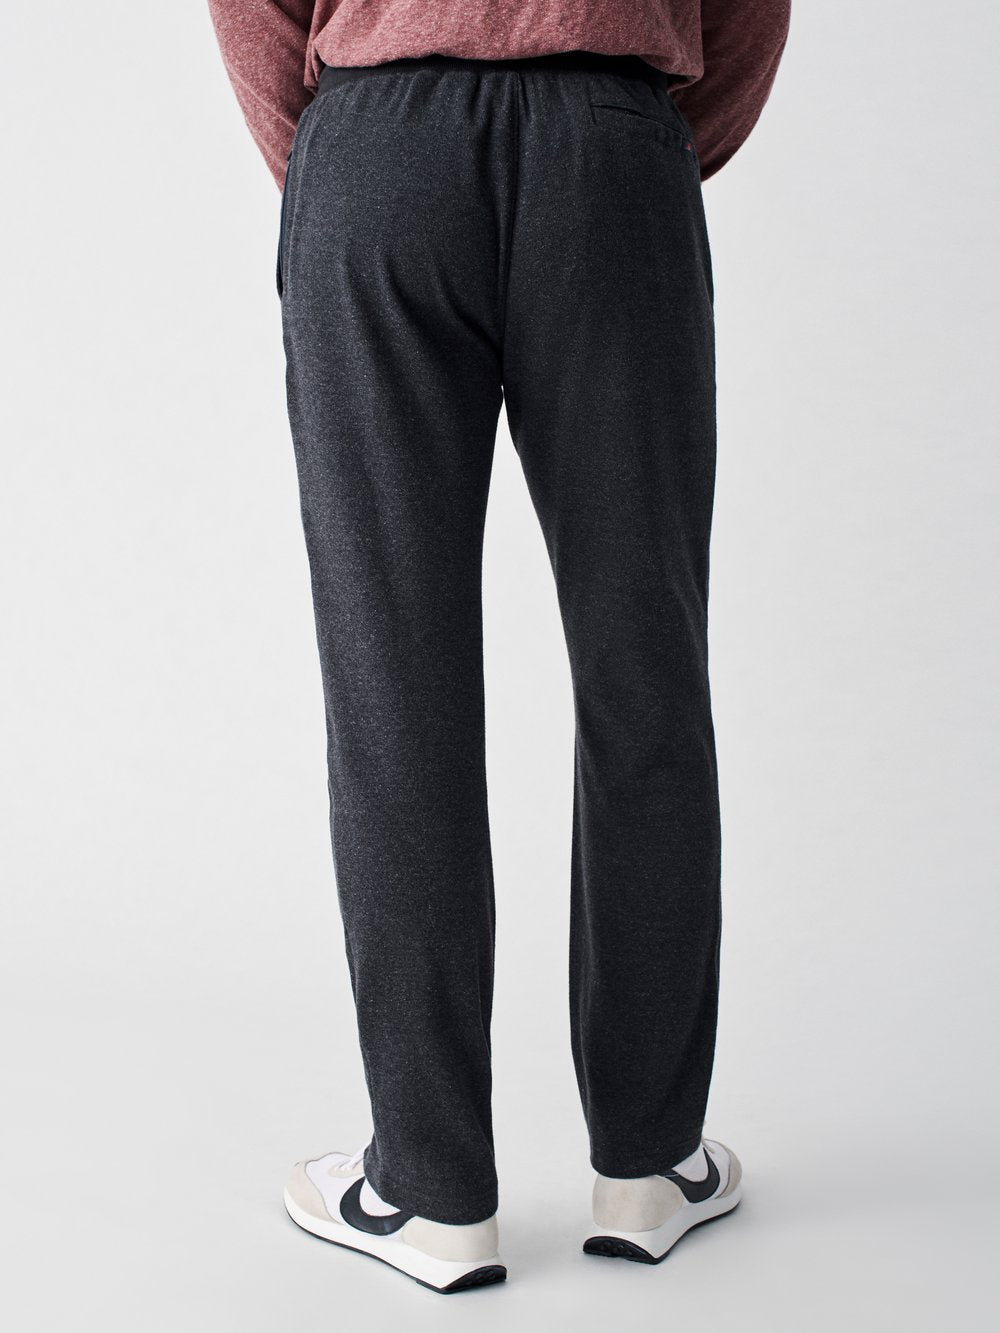 Men Knit Alpine Pant - The Lake and Company